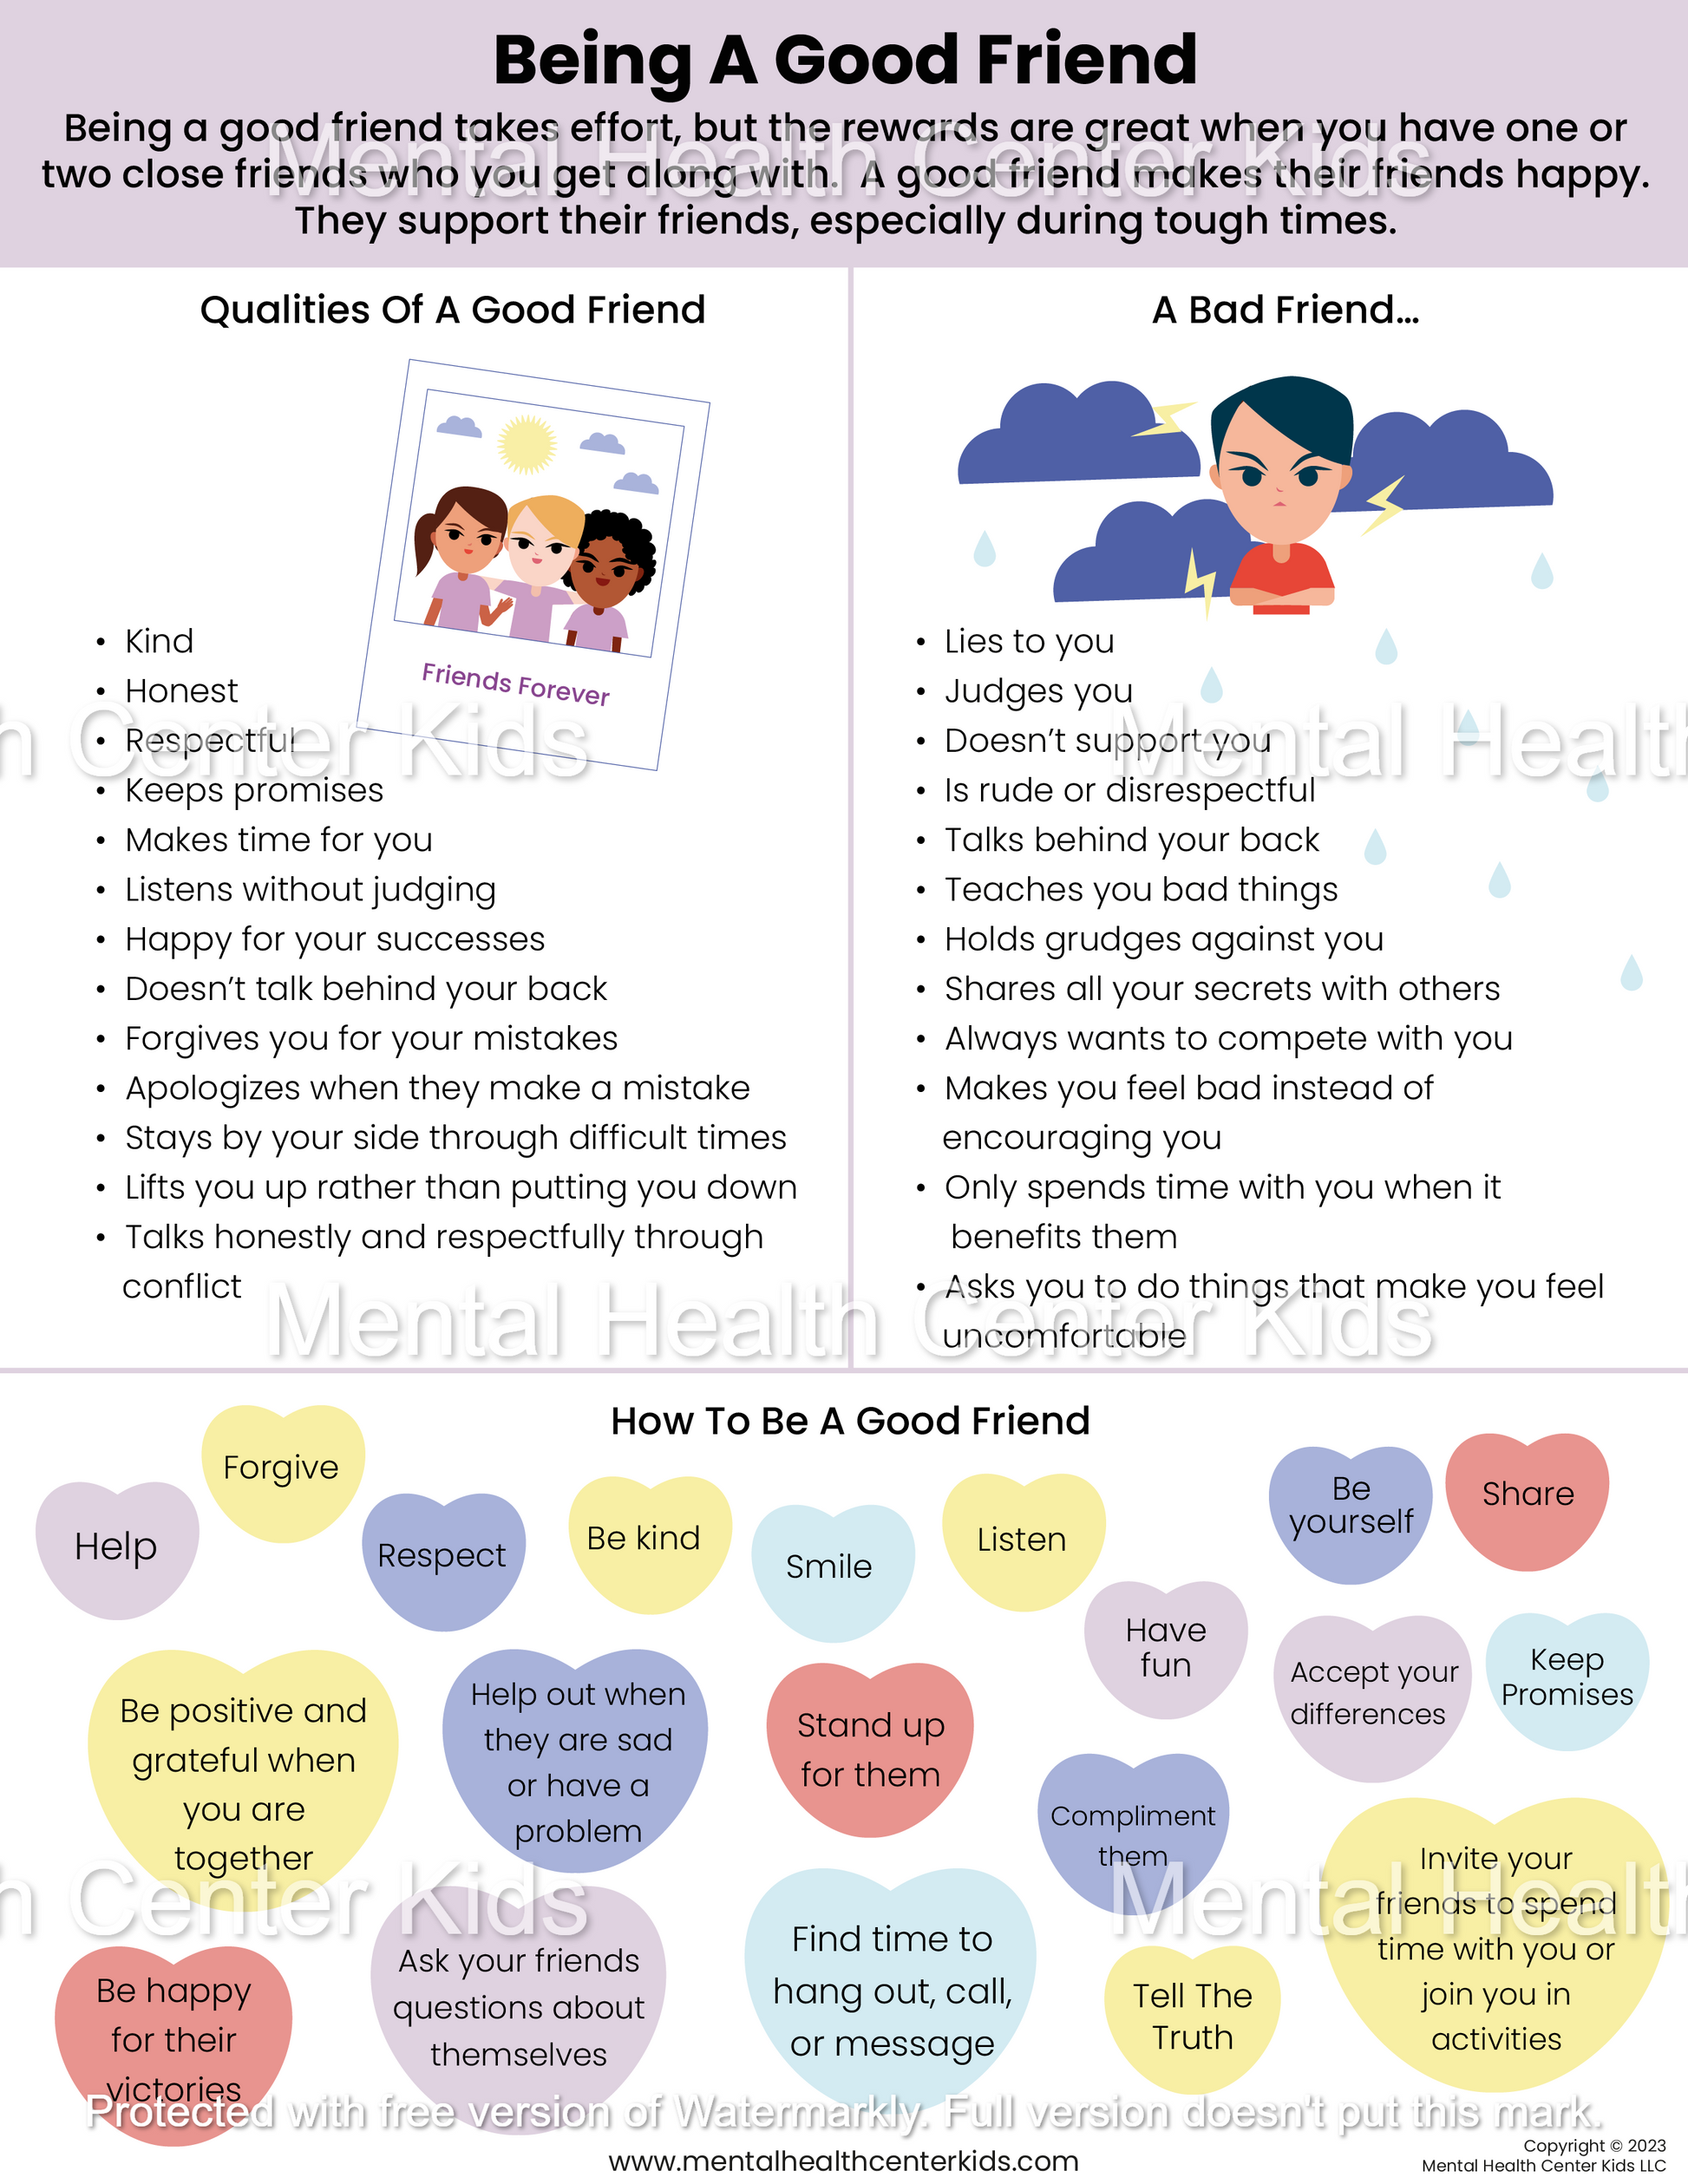 Defining The Qualities Of A Good Friend [Infographic] - Venngage